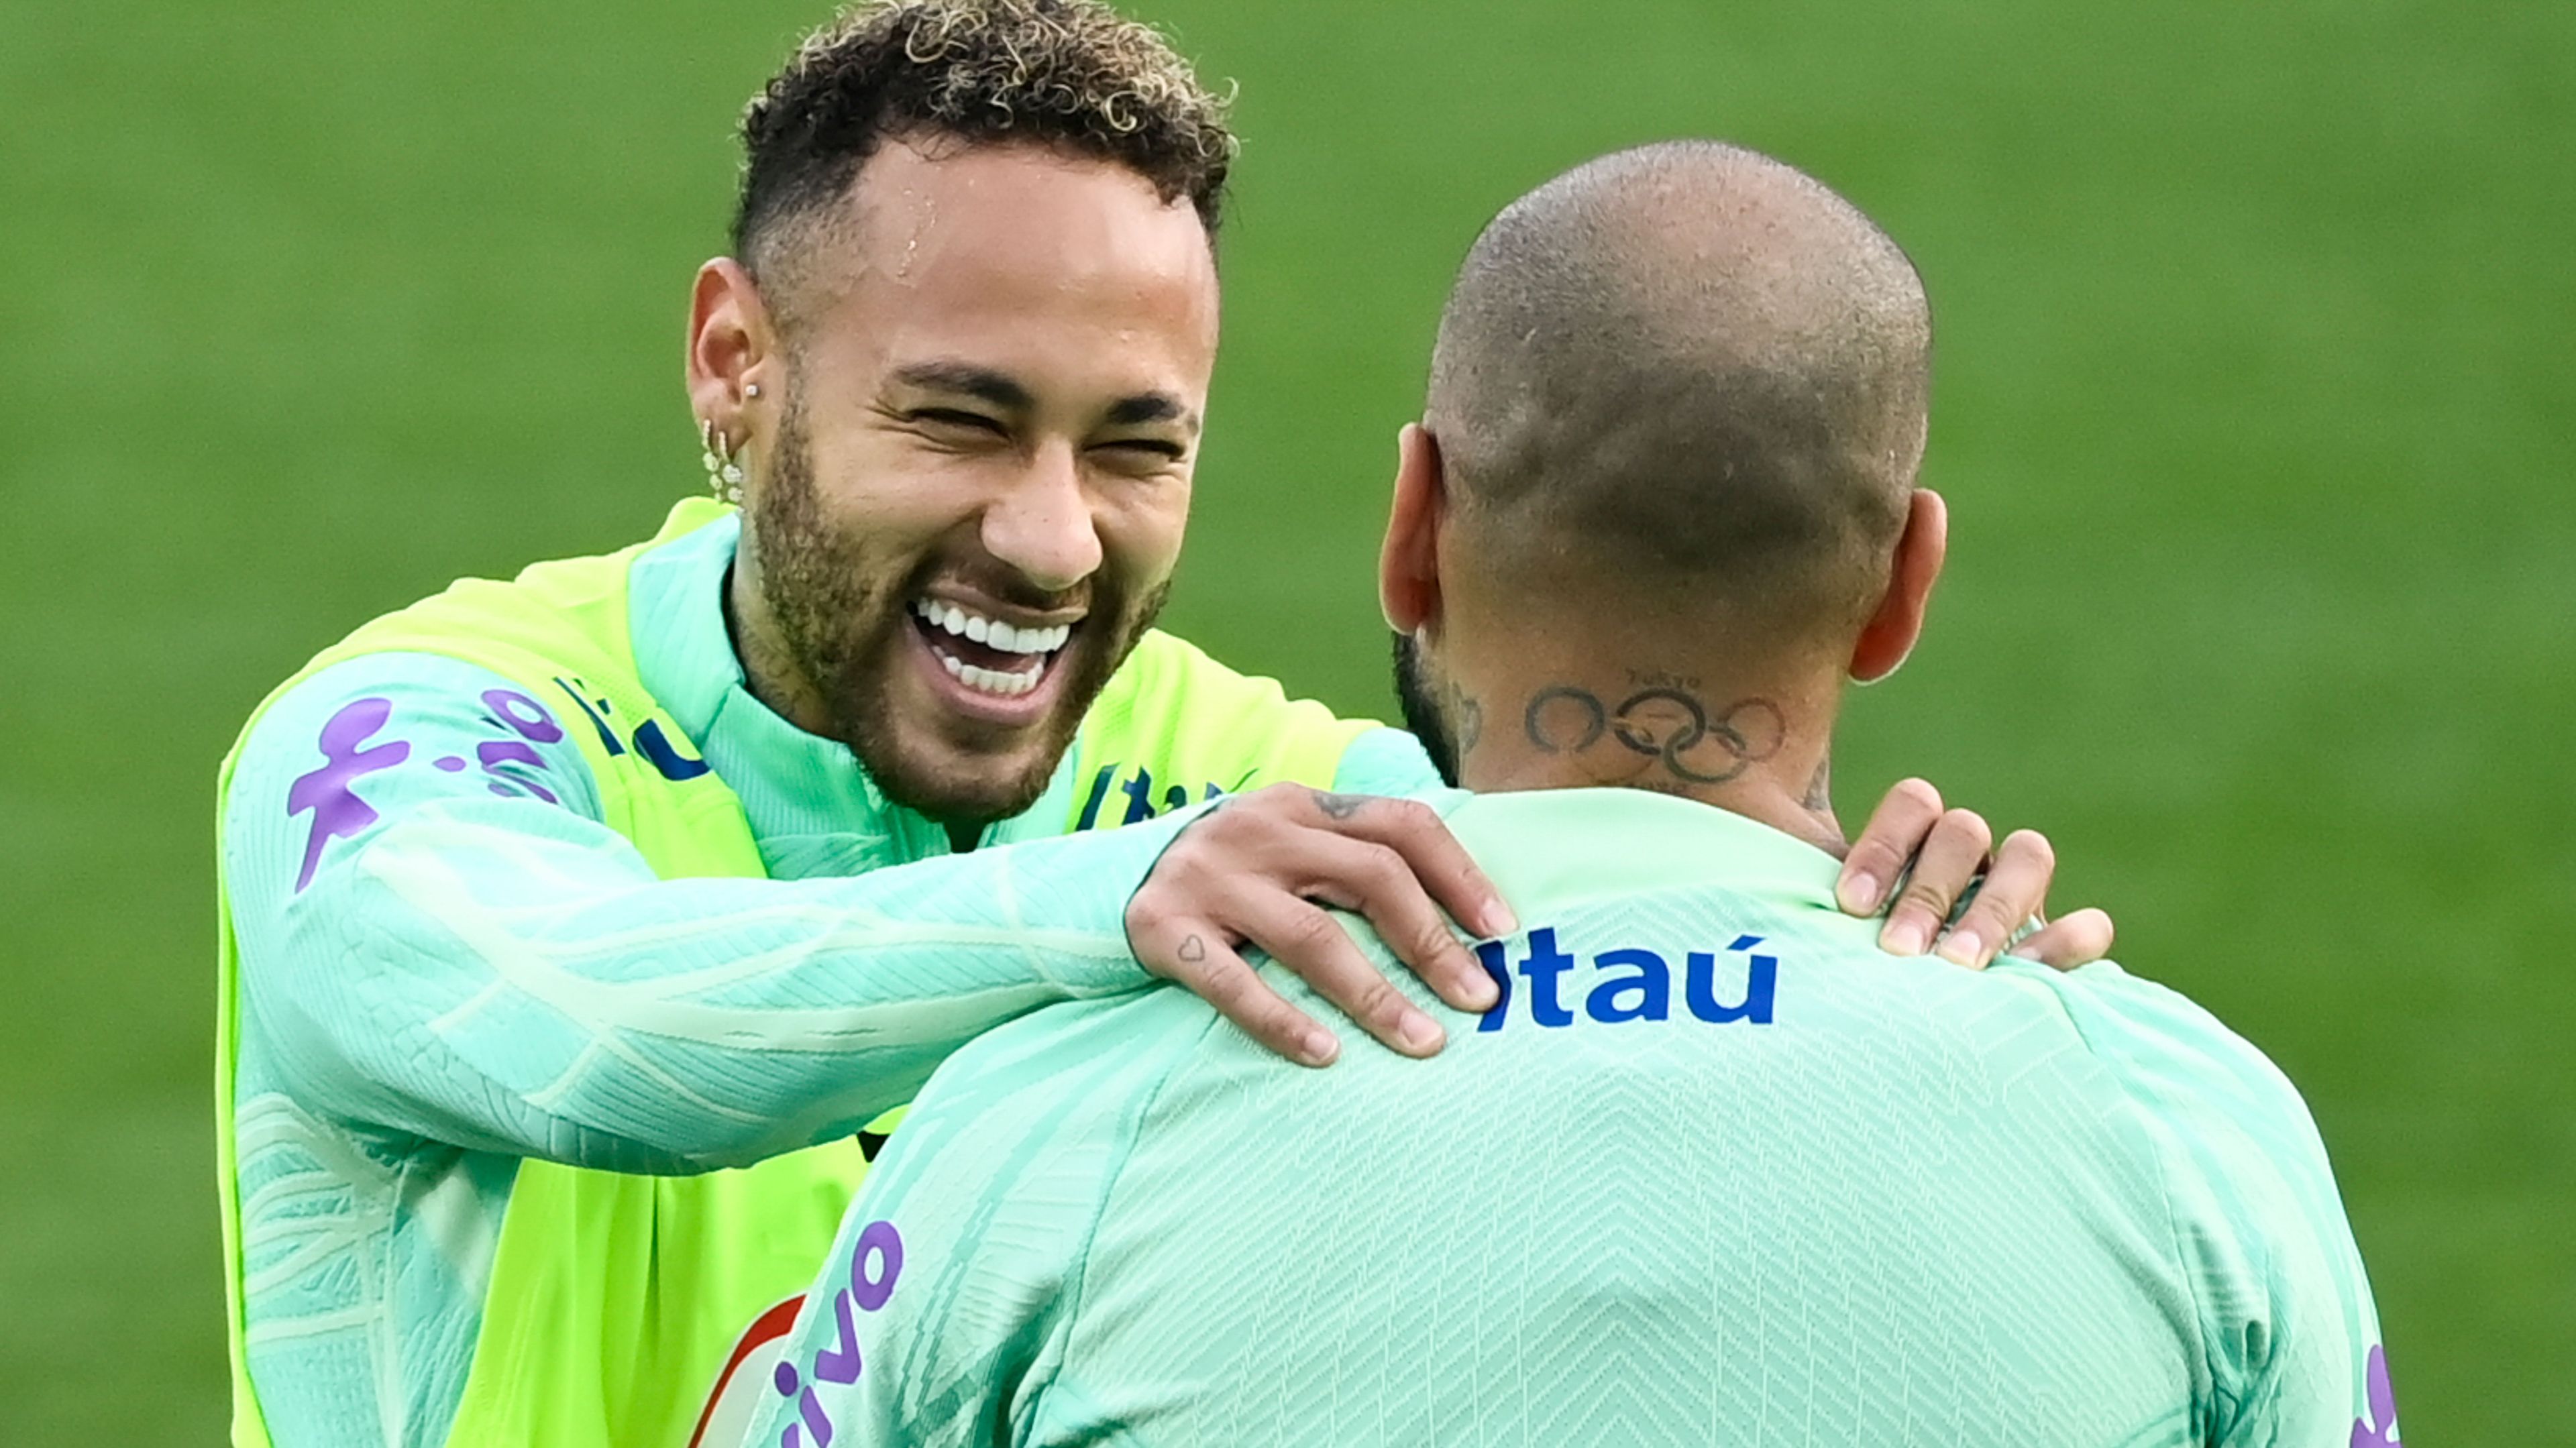 Neymar Jr and Dani Alves of Brazil during a training session prior to the World Cup in Qatar.